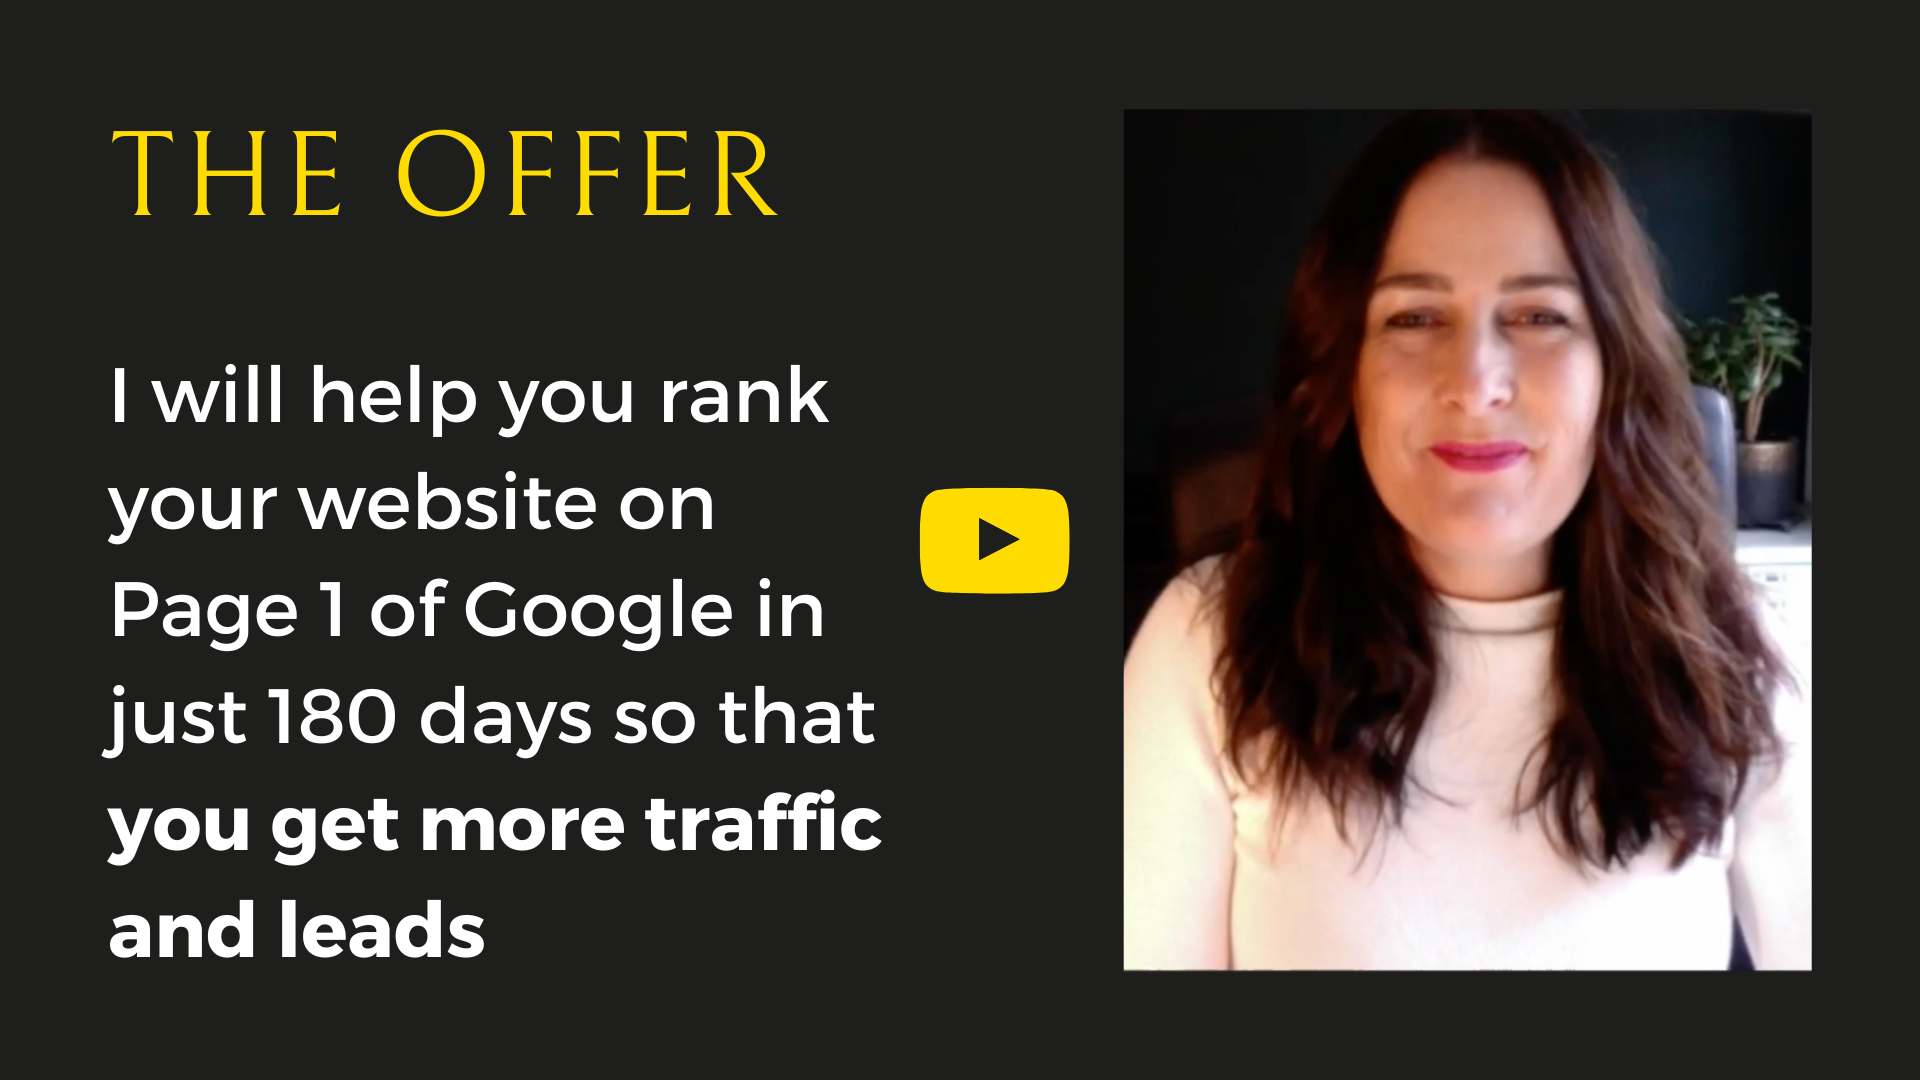 I will help you rank your website on Page of Google in just 180 days